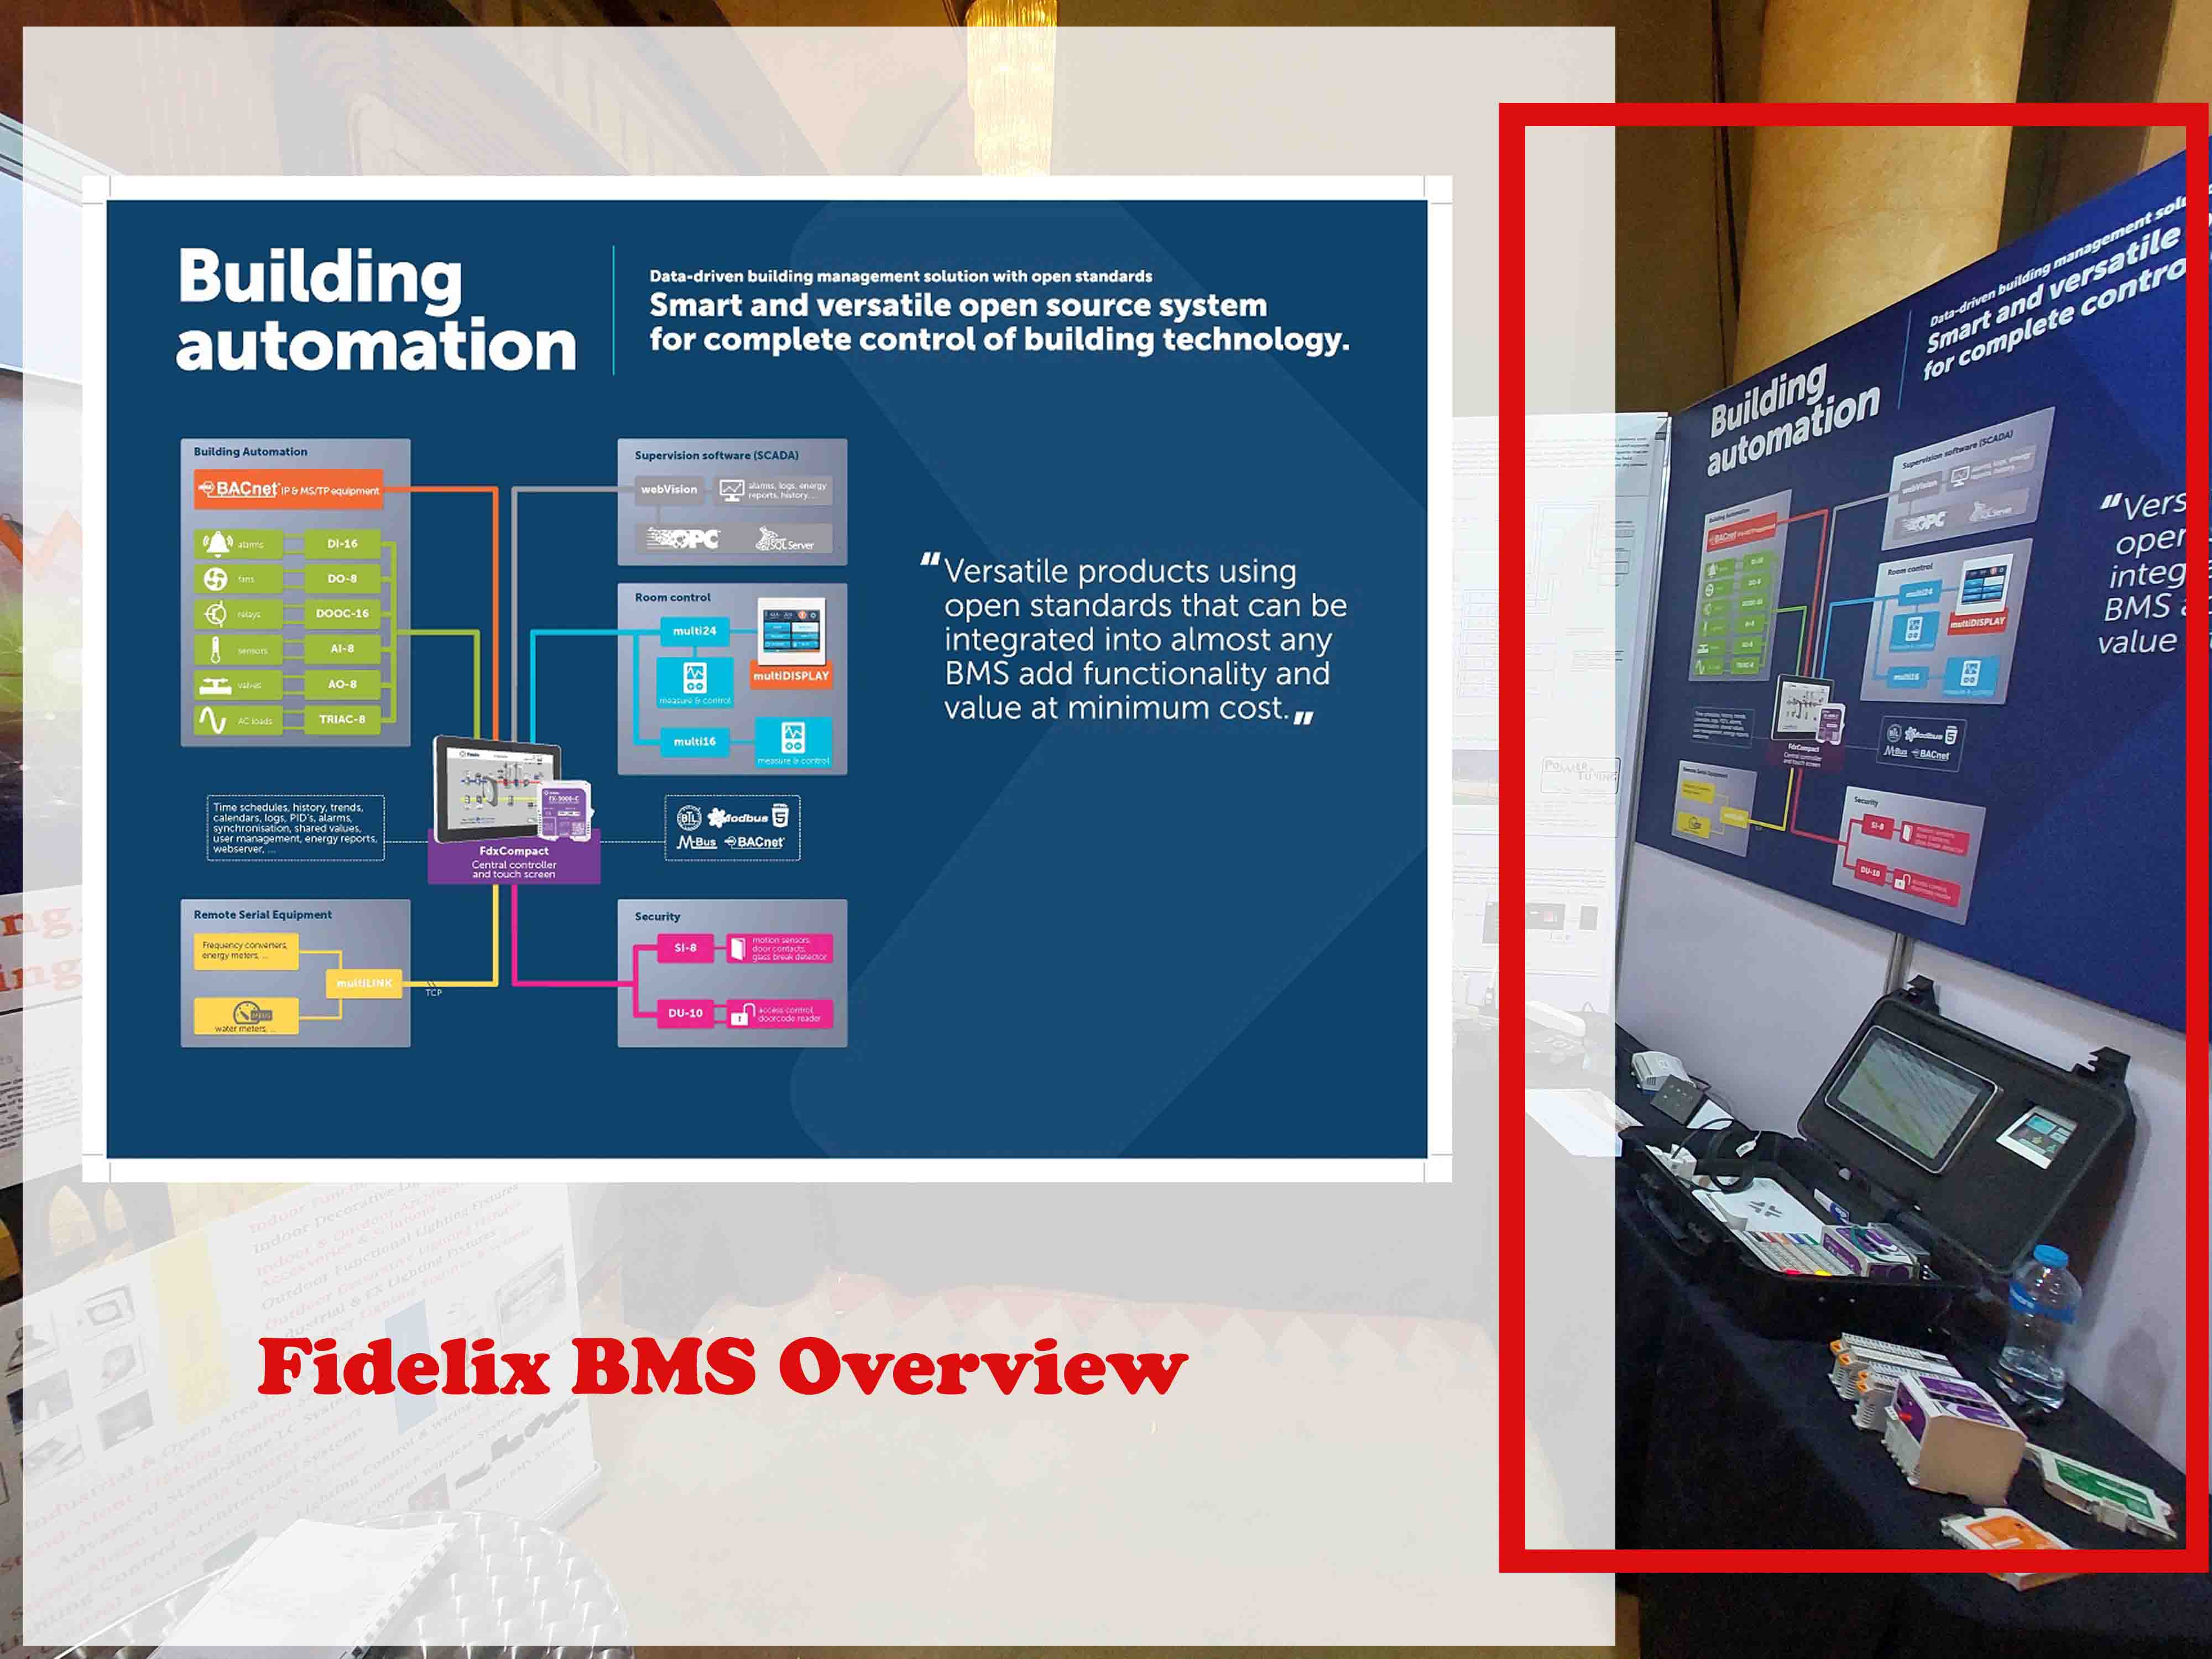 Fidelix BMS Overview